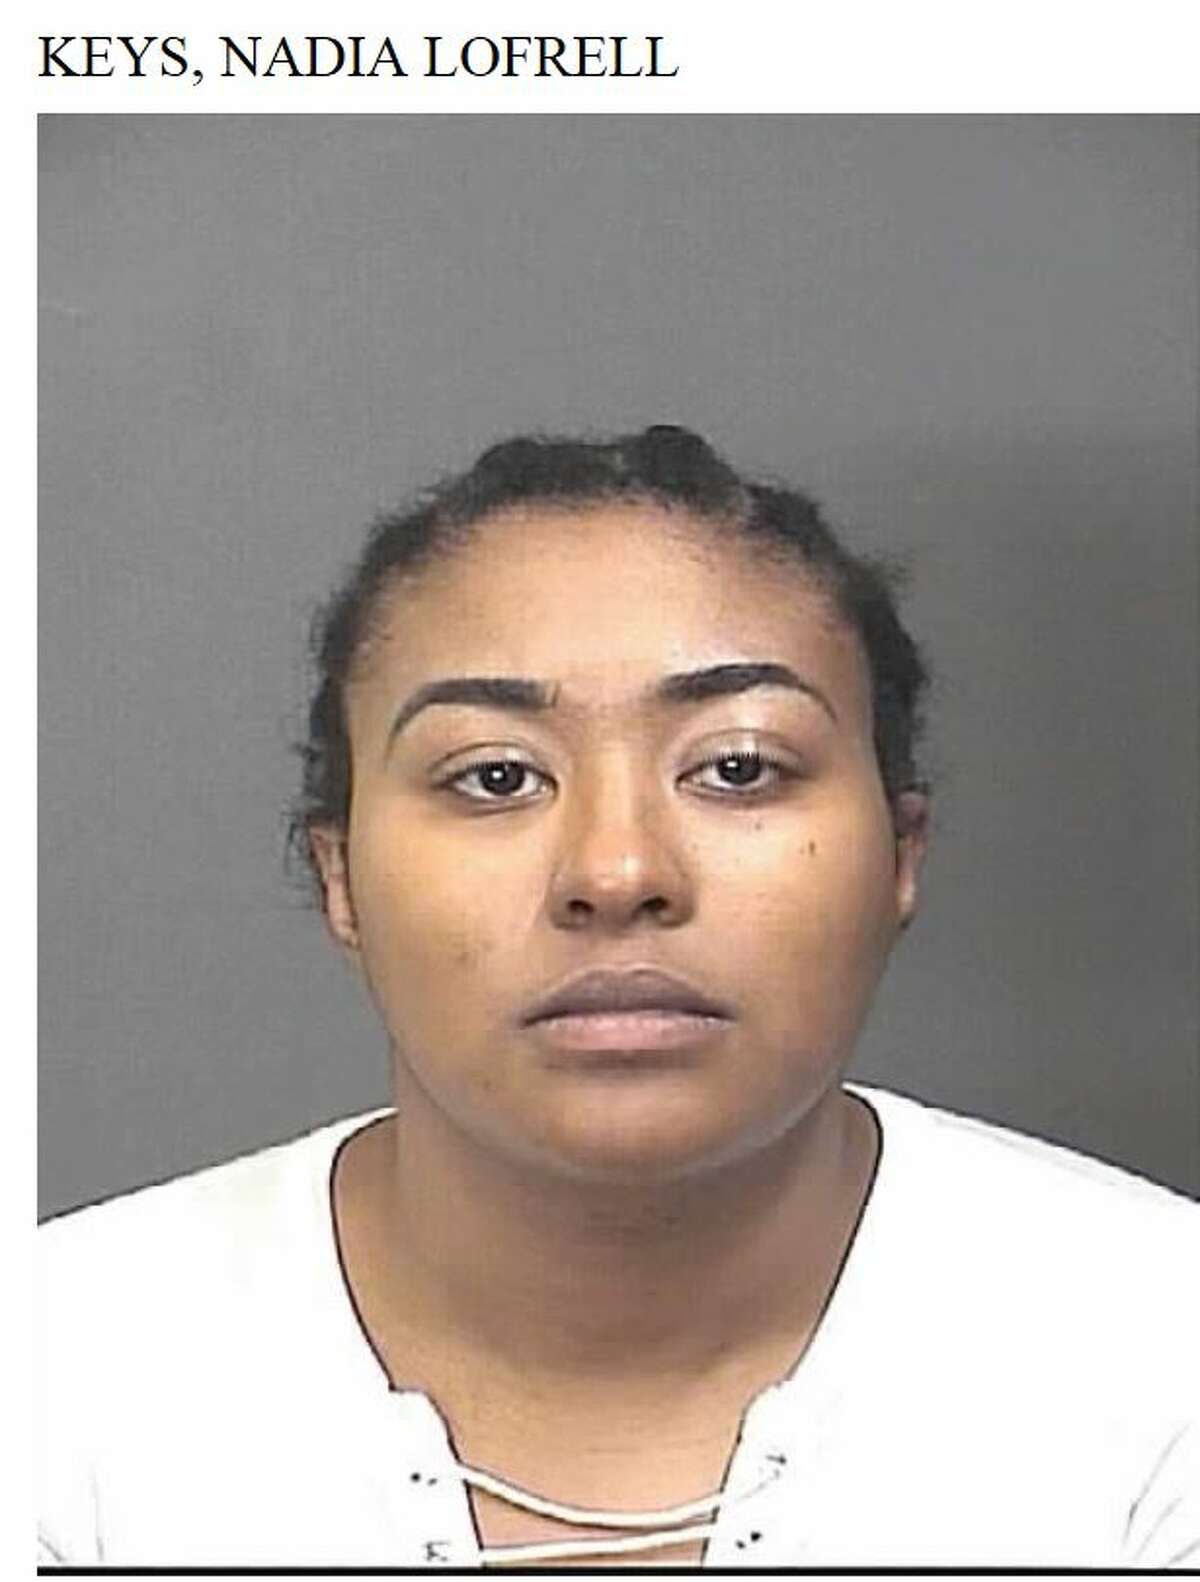 Nadia Keys, 23, of Katy is charged with prostitution and Baytown warrants after a Feb. 6 prostitution sting at a Baytown hotel.